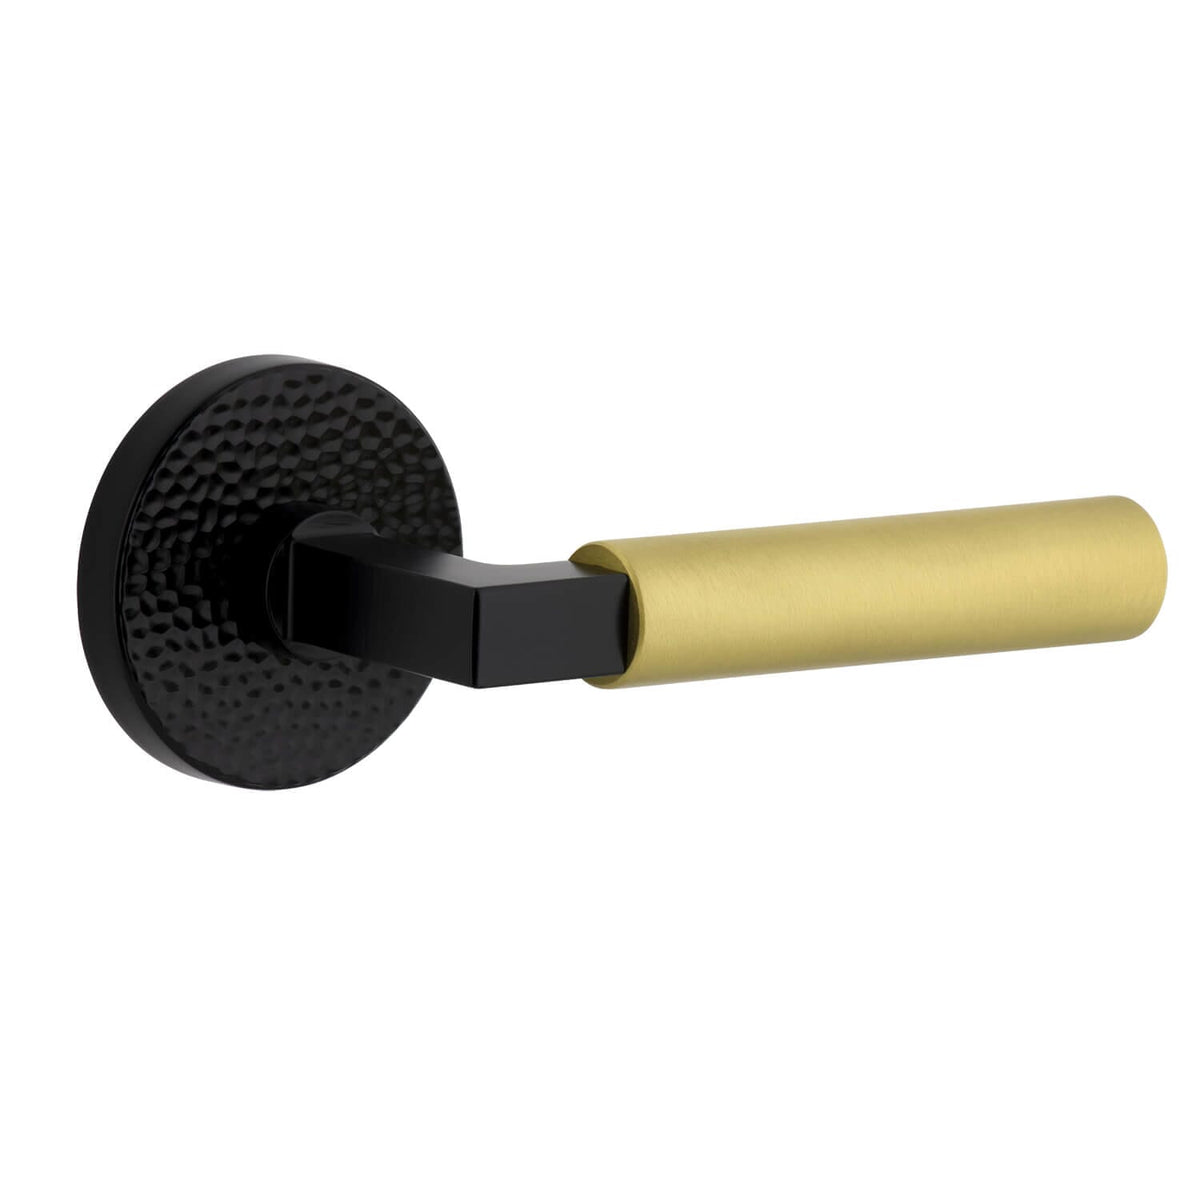 Circolo Hammered Rosette in Satin Black with Satin Brass Contempo Smooth Lever